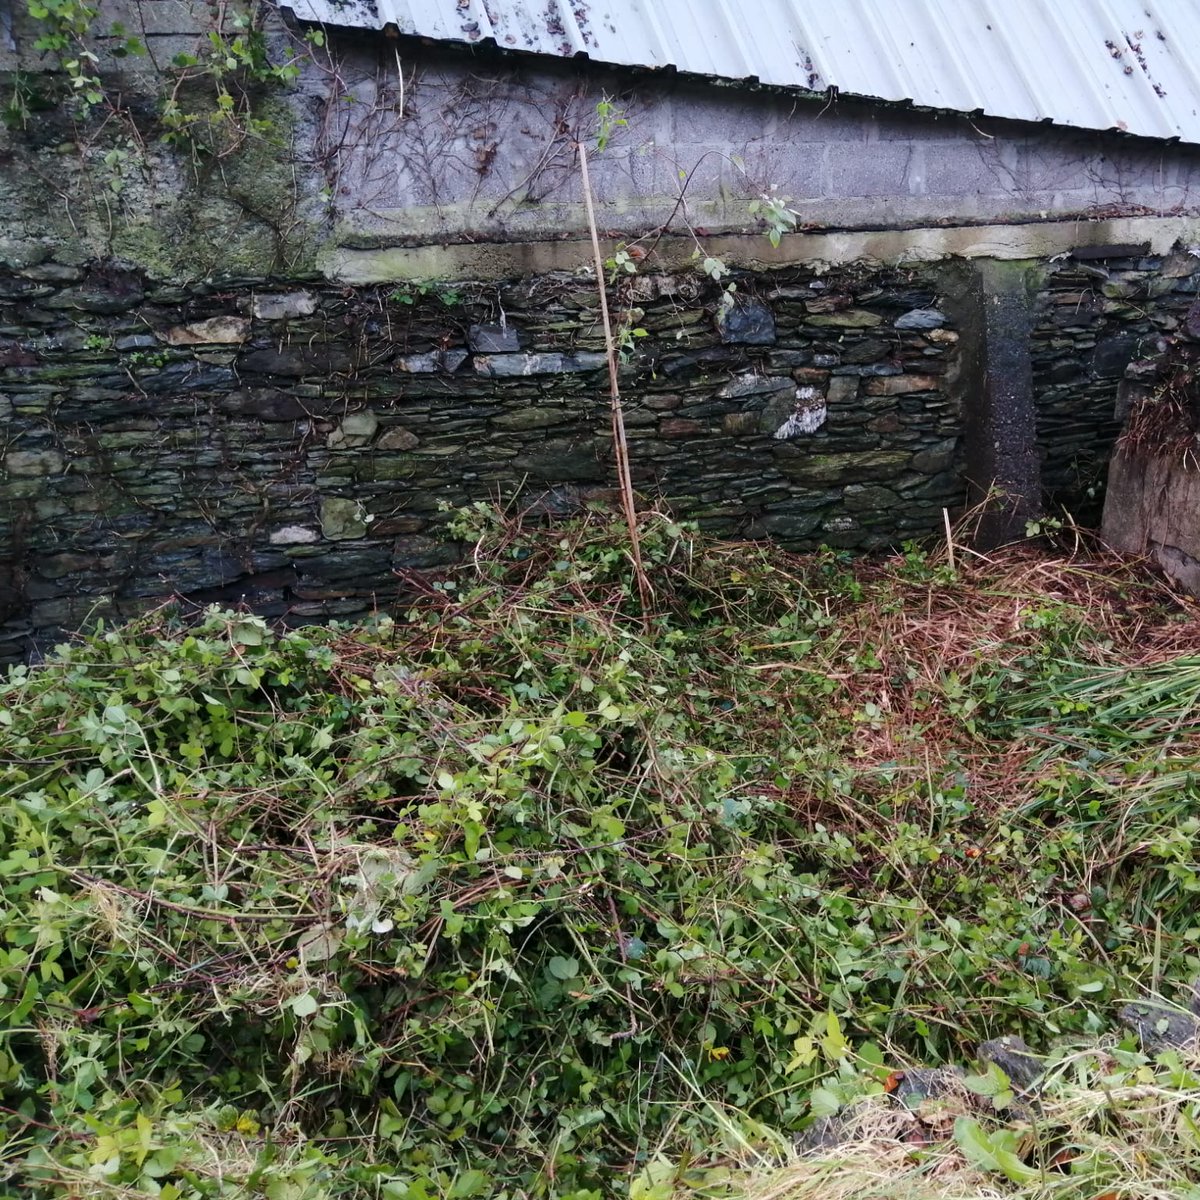 Great clearing by Bantry Tidy Towns volunteers last evening in Garryvurcha Cemetery. Well done, everyone! A lot of briars were covering up trees which couldn't be seen. The last photo shows a lone bark birch finally seeing the light! #BantryTidyTowns #GarryvurchaCemetary